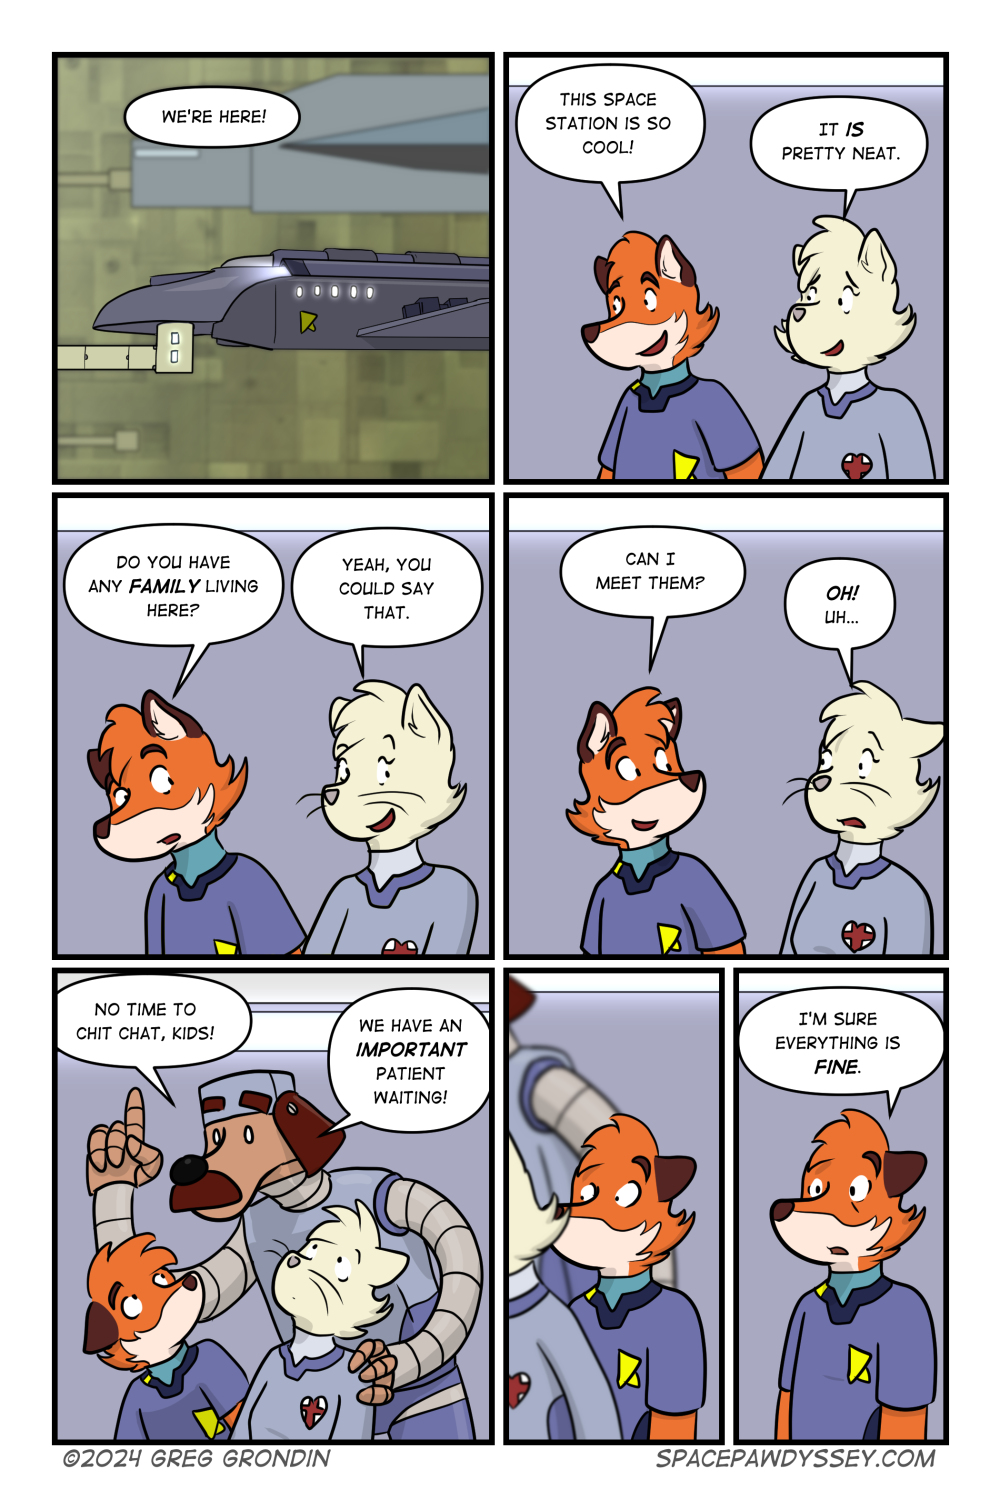 Space Pawdyssey #668